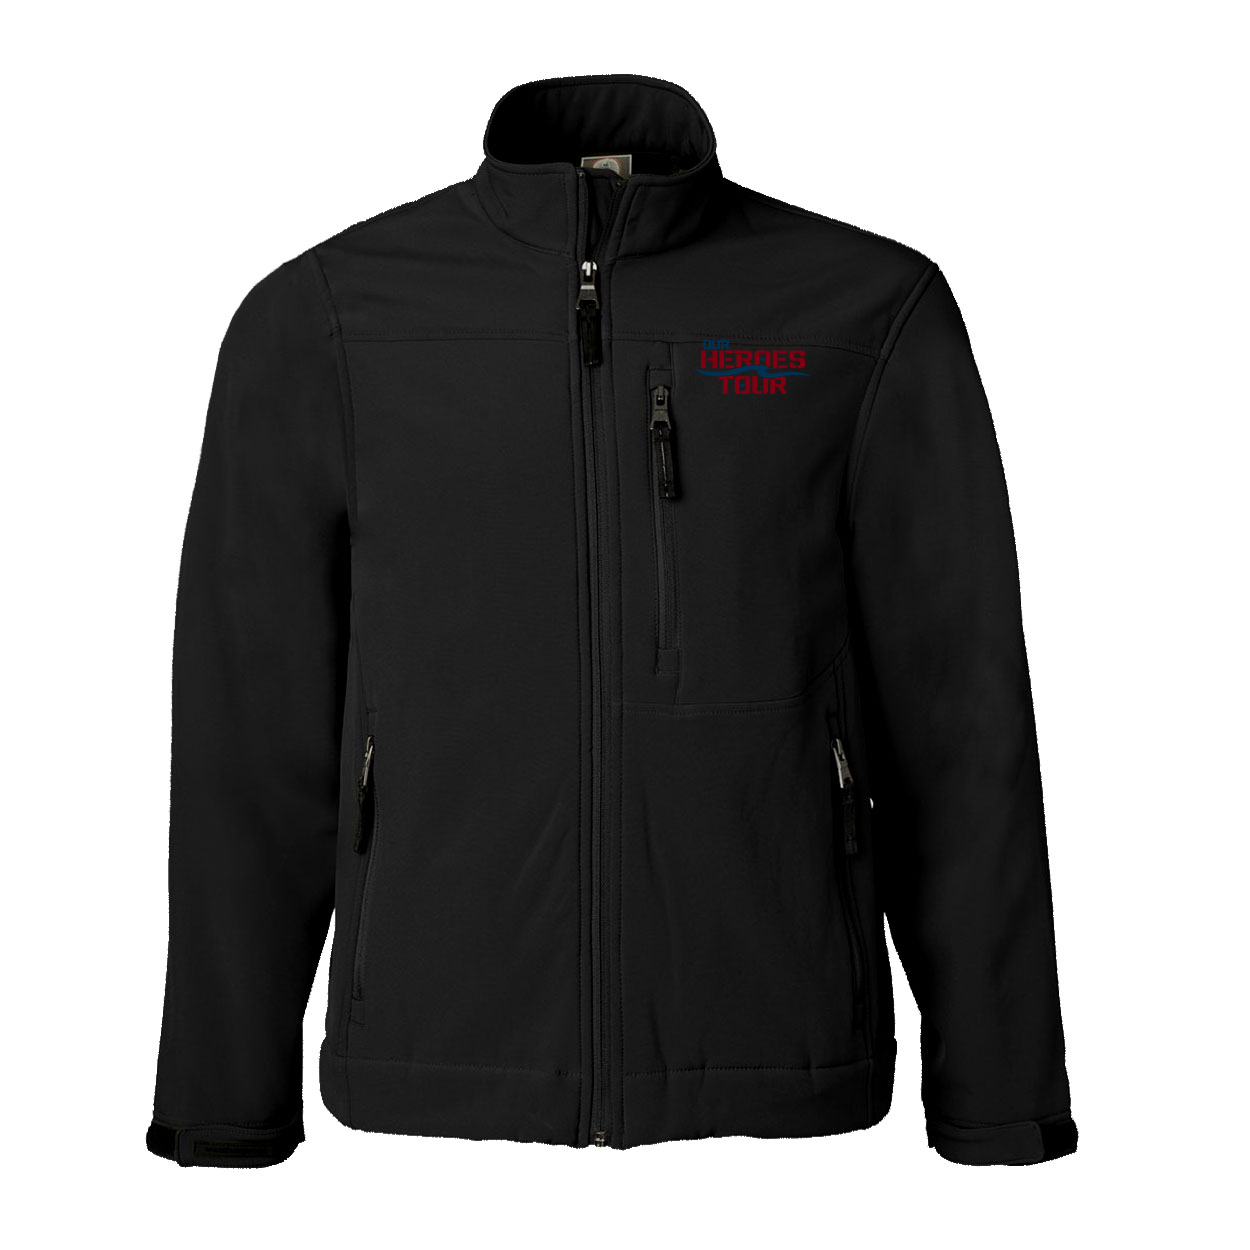 Our Heroes Tour Night Out Soft Shell Weatherproof Jacket